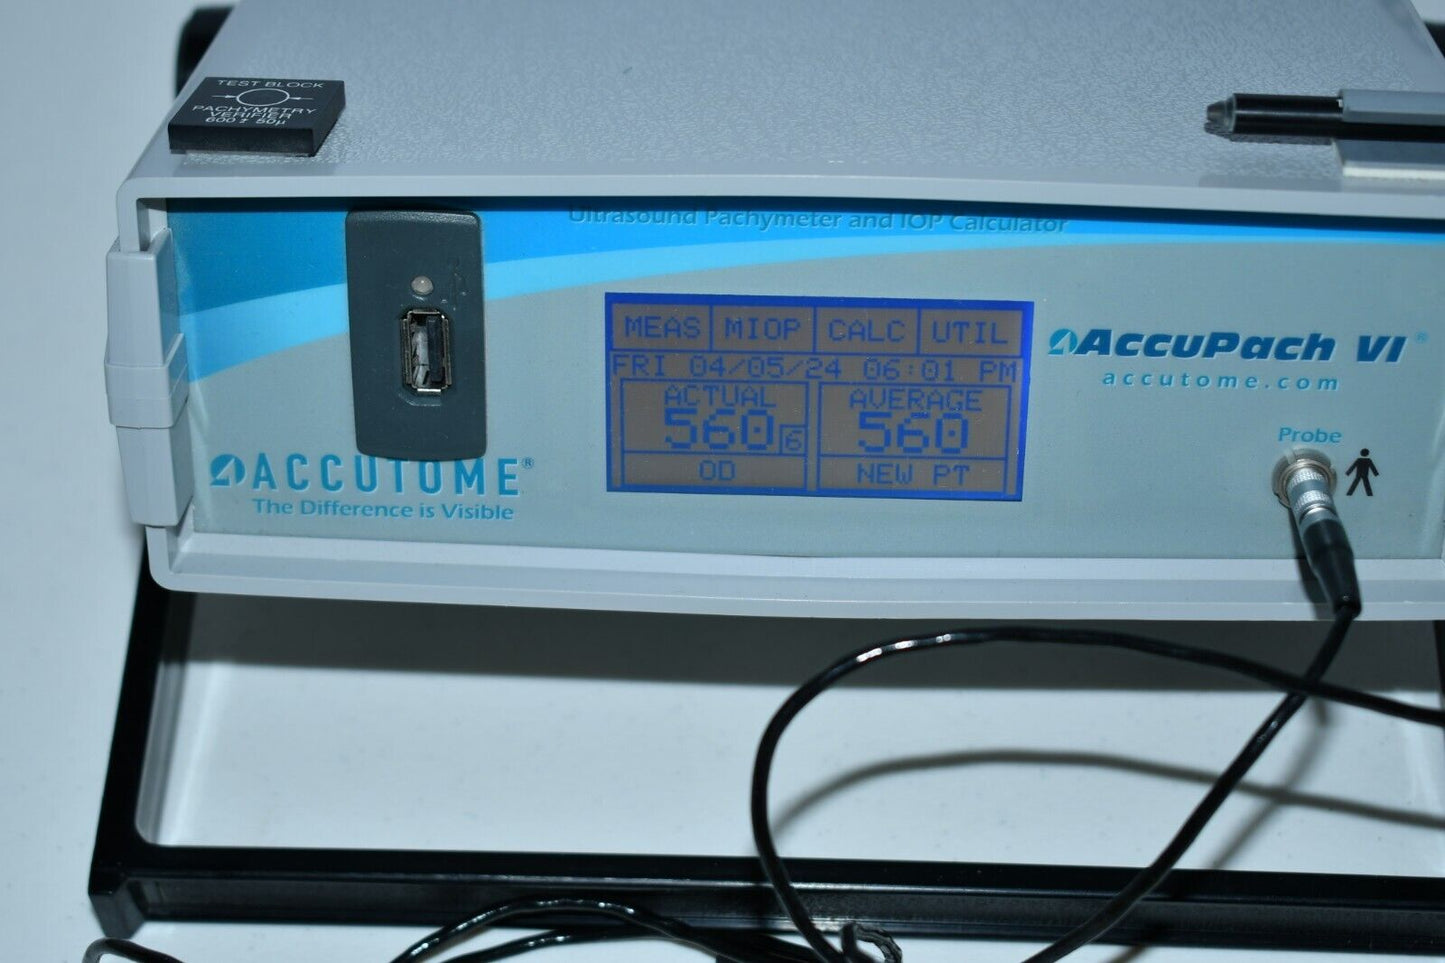 Accutome AccuPach VI Ultrasound Pachymeter